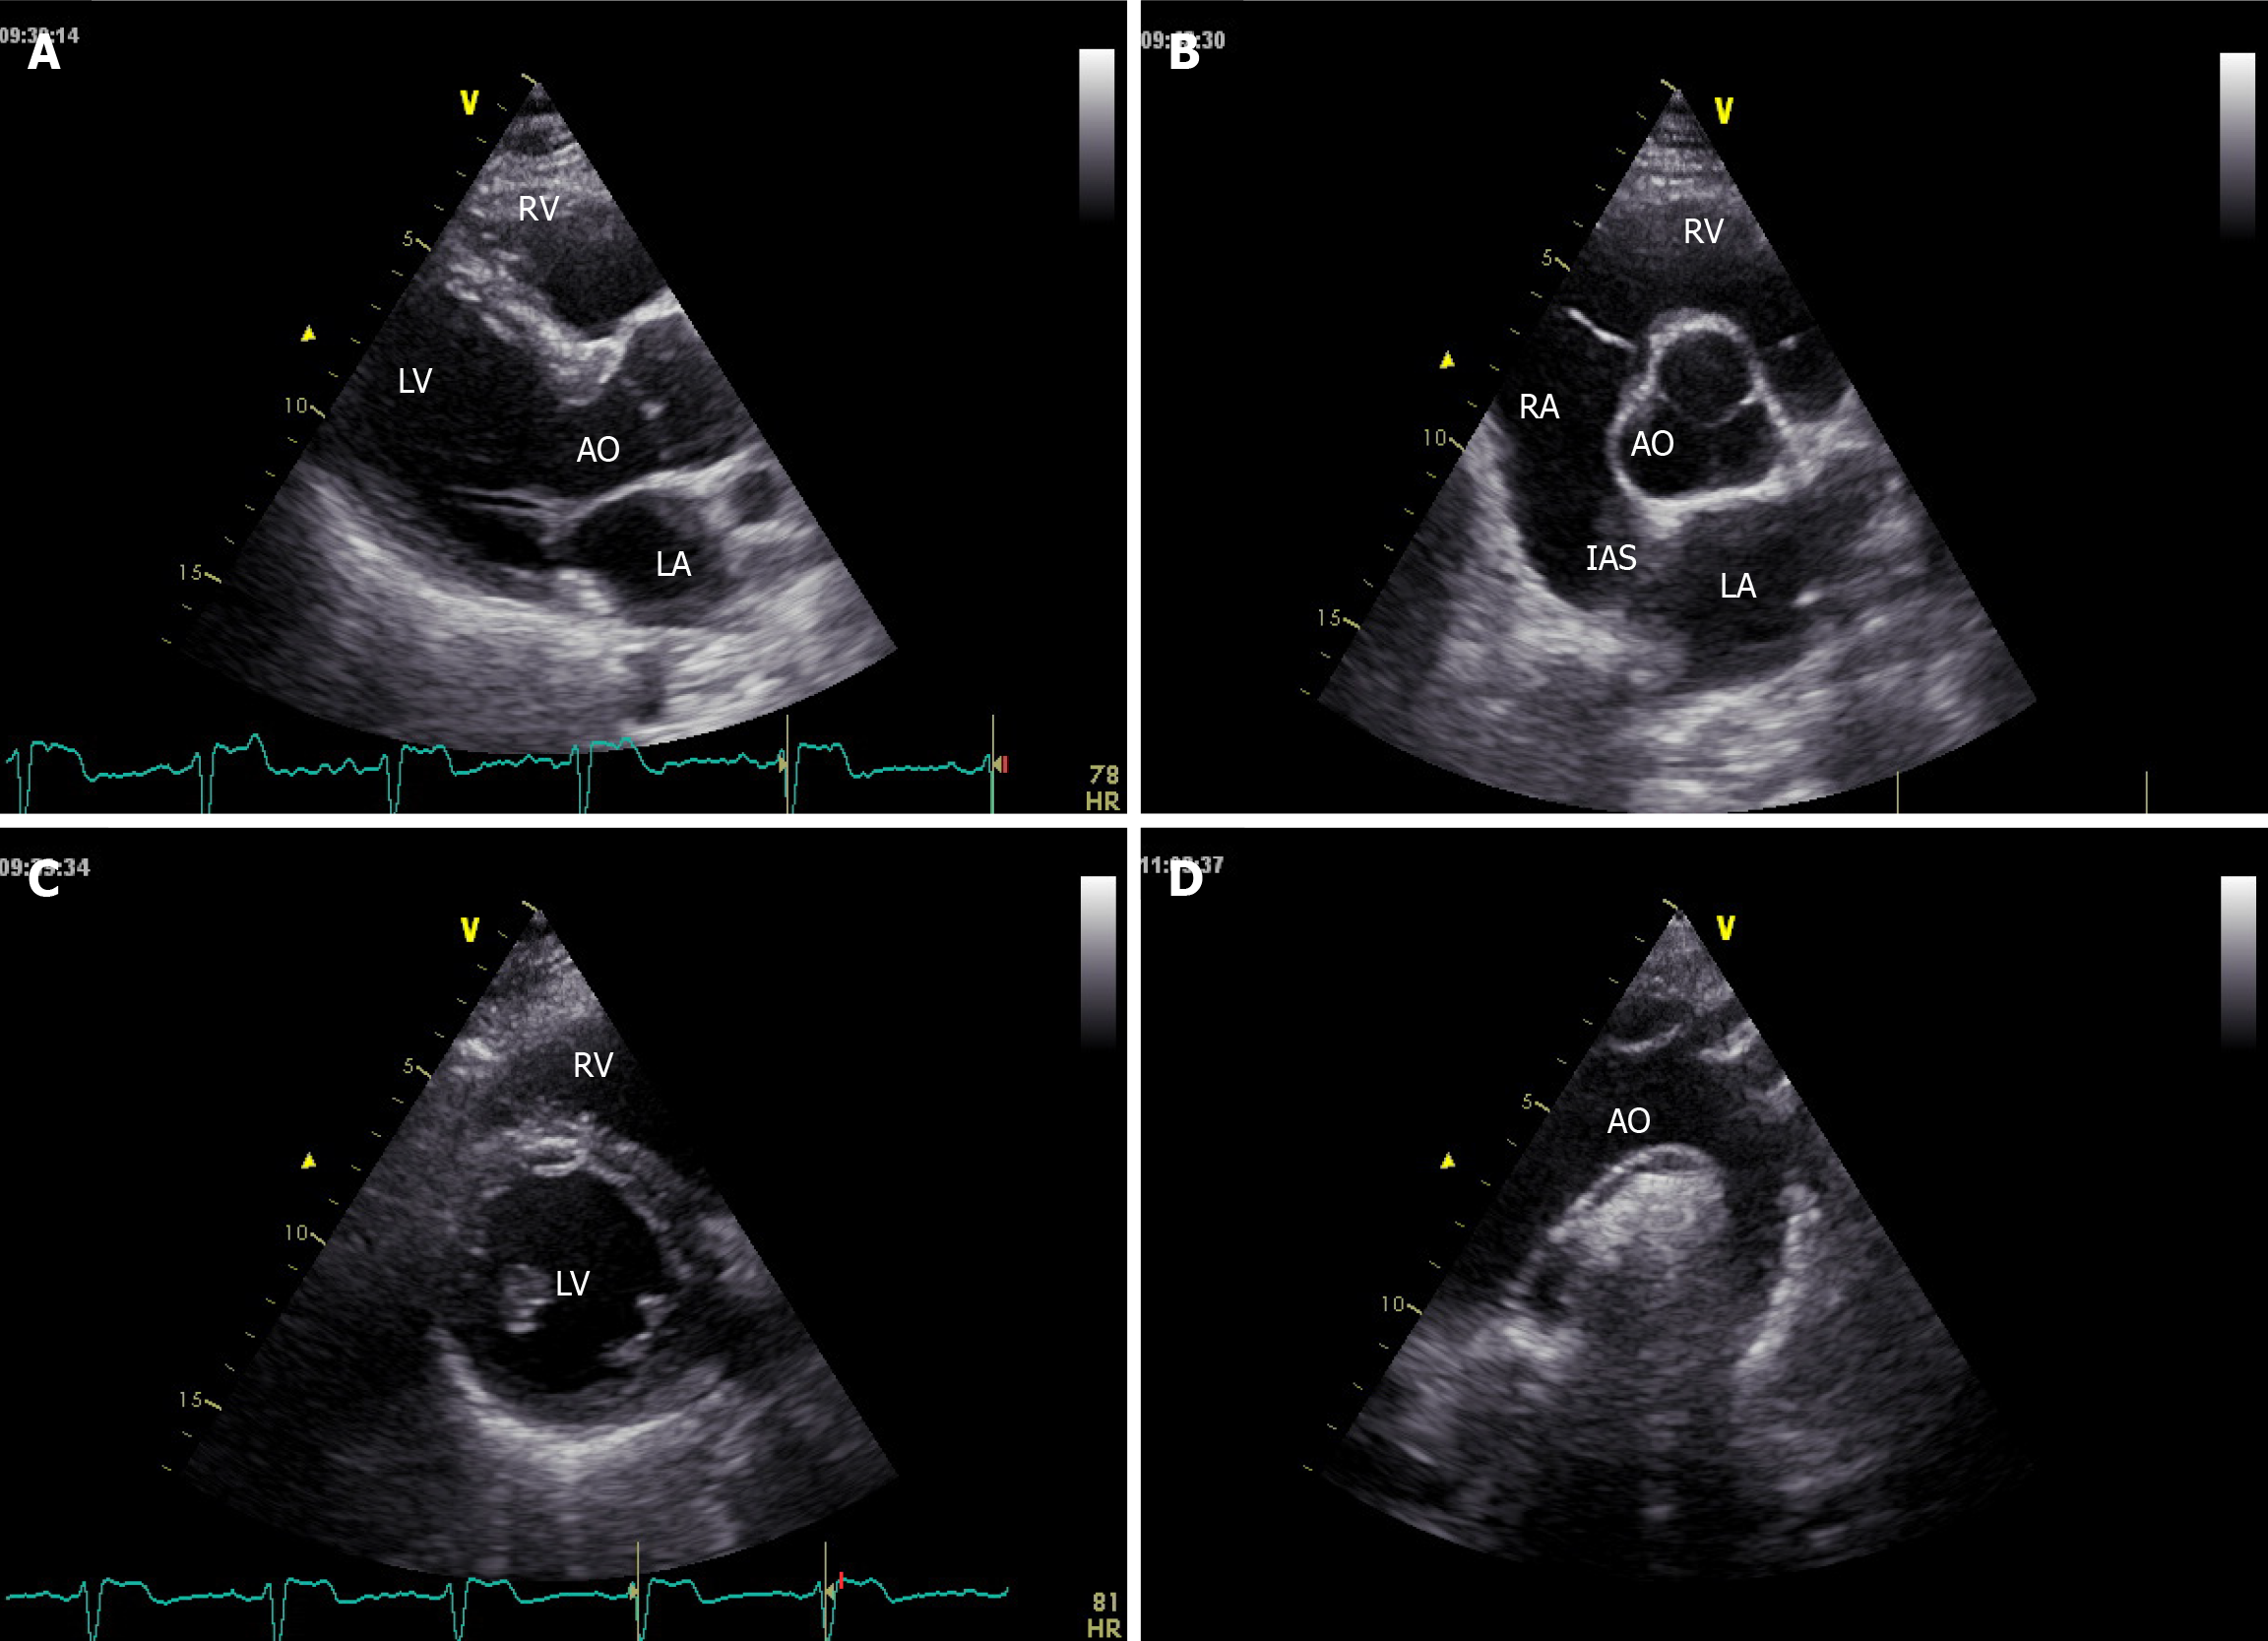 Efficacy of echocardiography for differential diagnosis of left ventricular  hypertrophy: special focus on speckle-tracking longitudinal strain